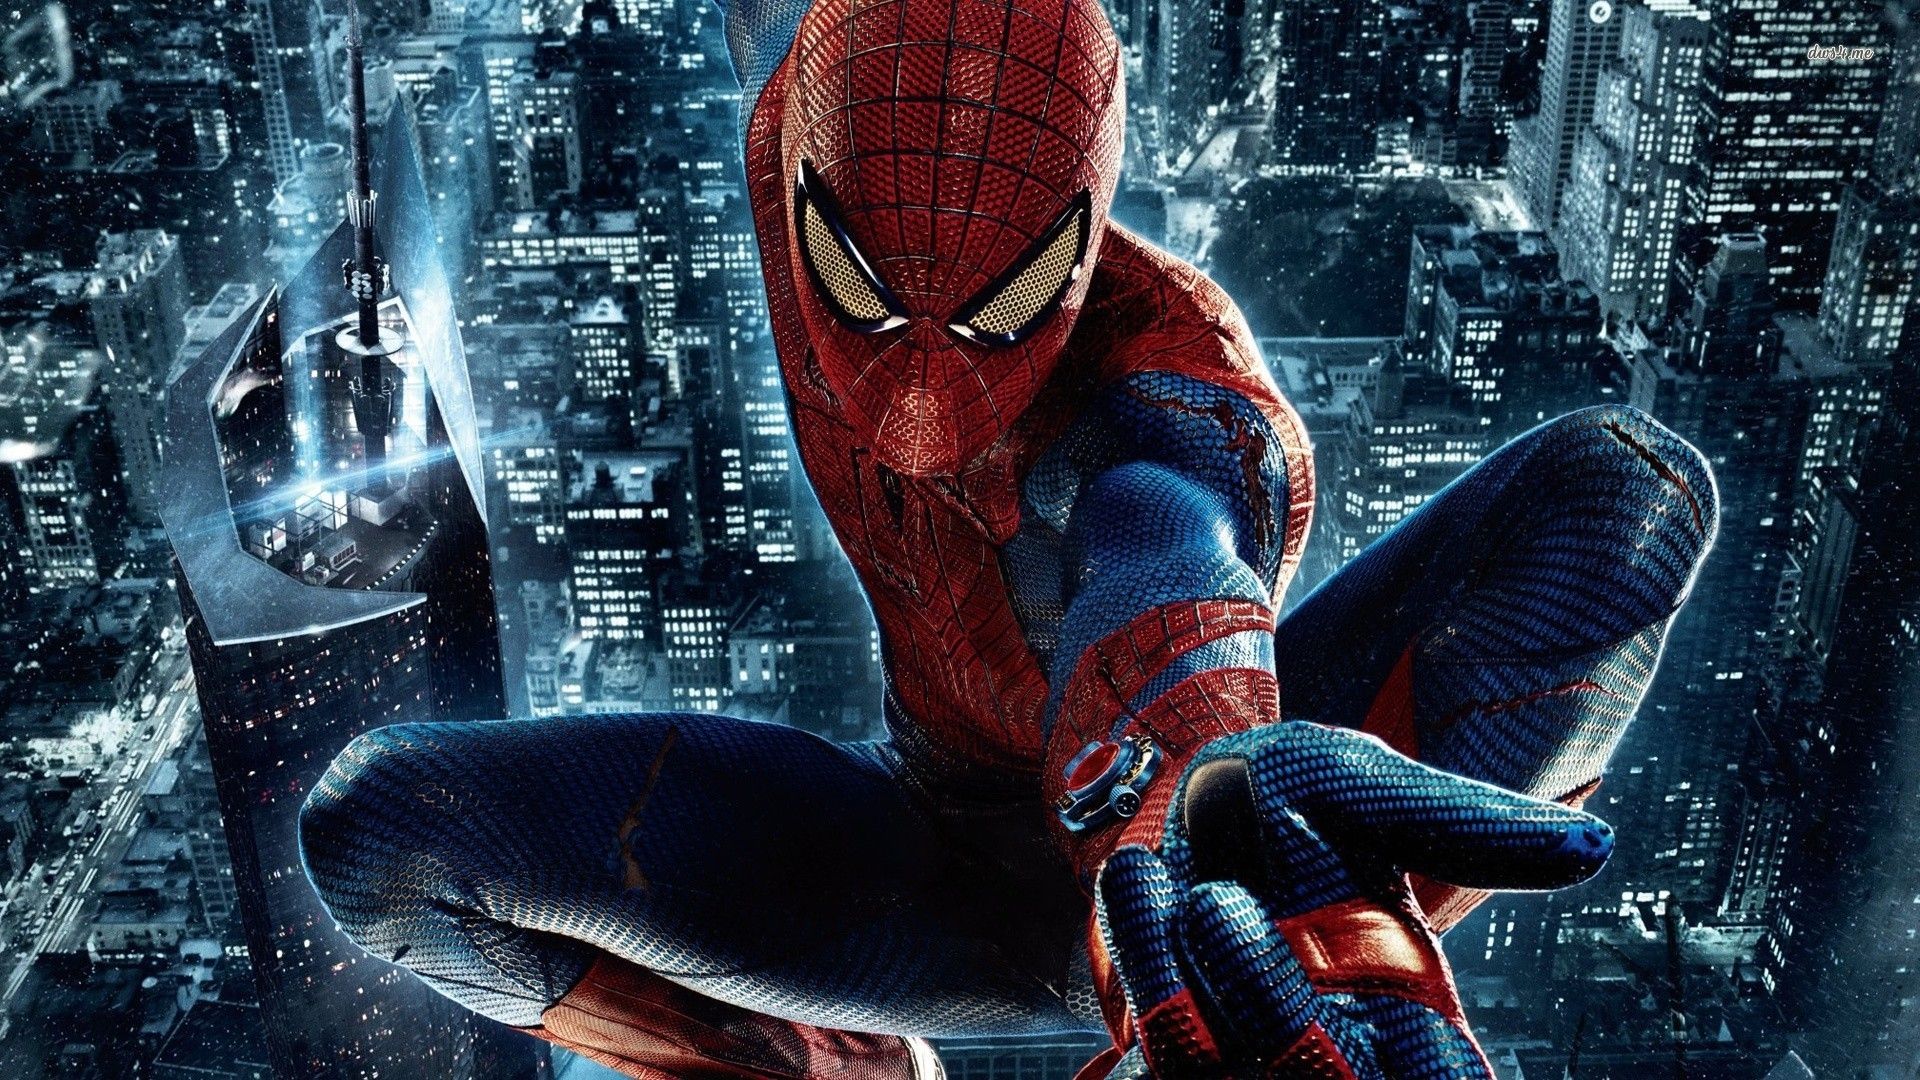 The Amazing Spider-Man wallpaper - Movie wallpapers - #21712